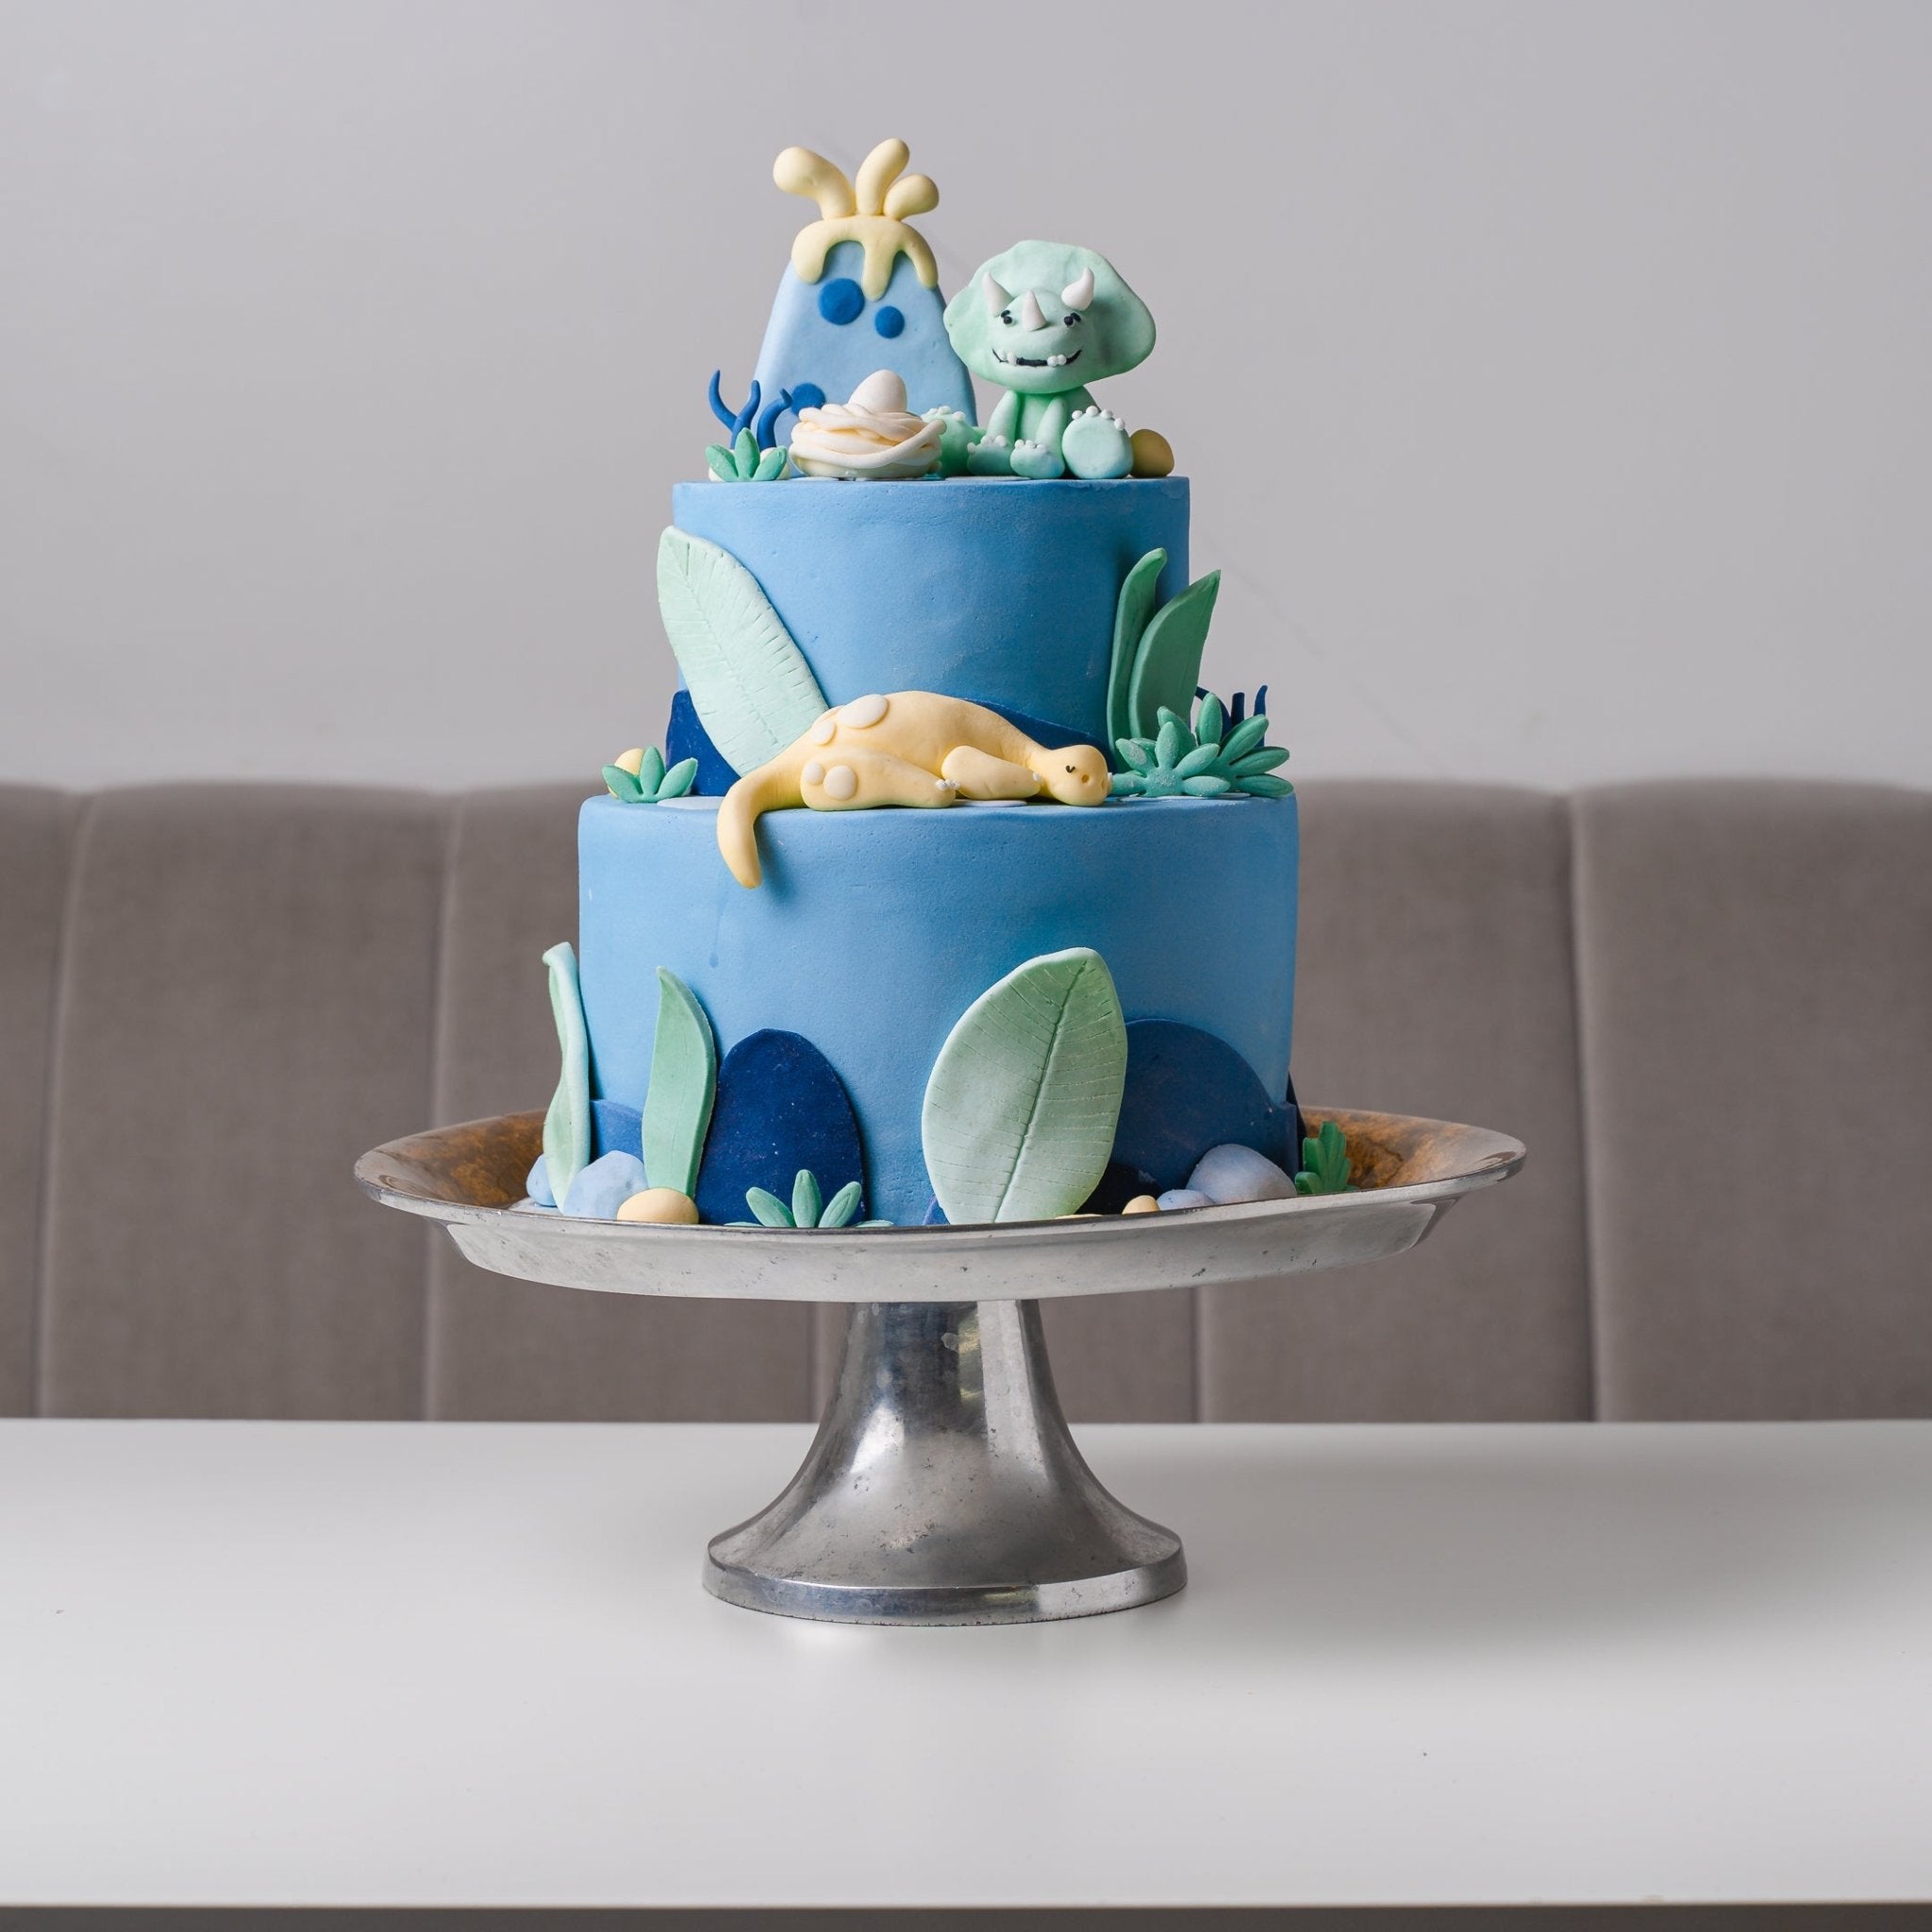 Mr Dinosaur Cake from Peppa Pig – Delivered in London – Etoile Bakery